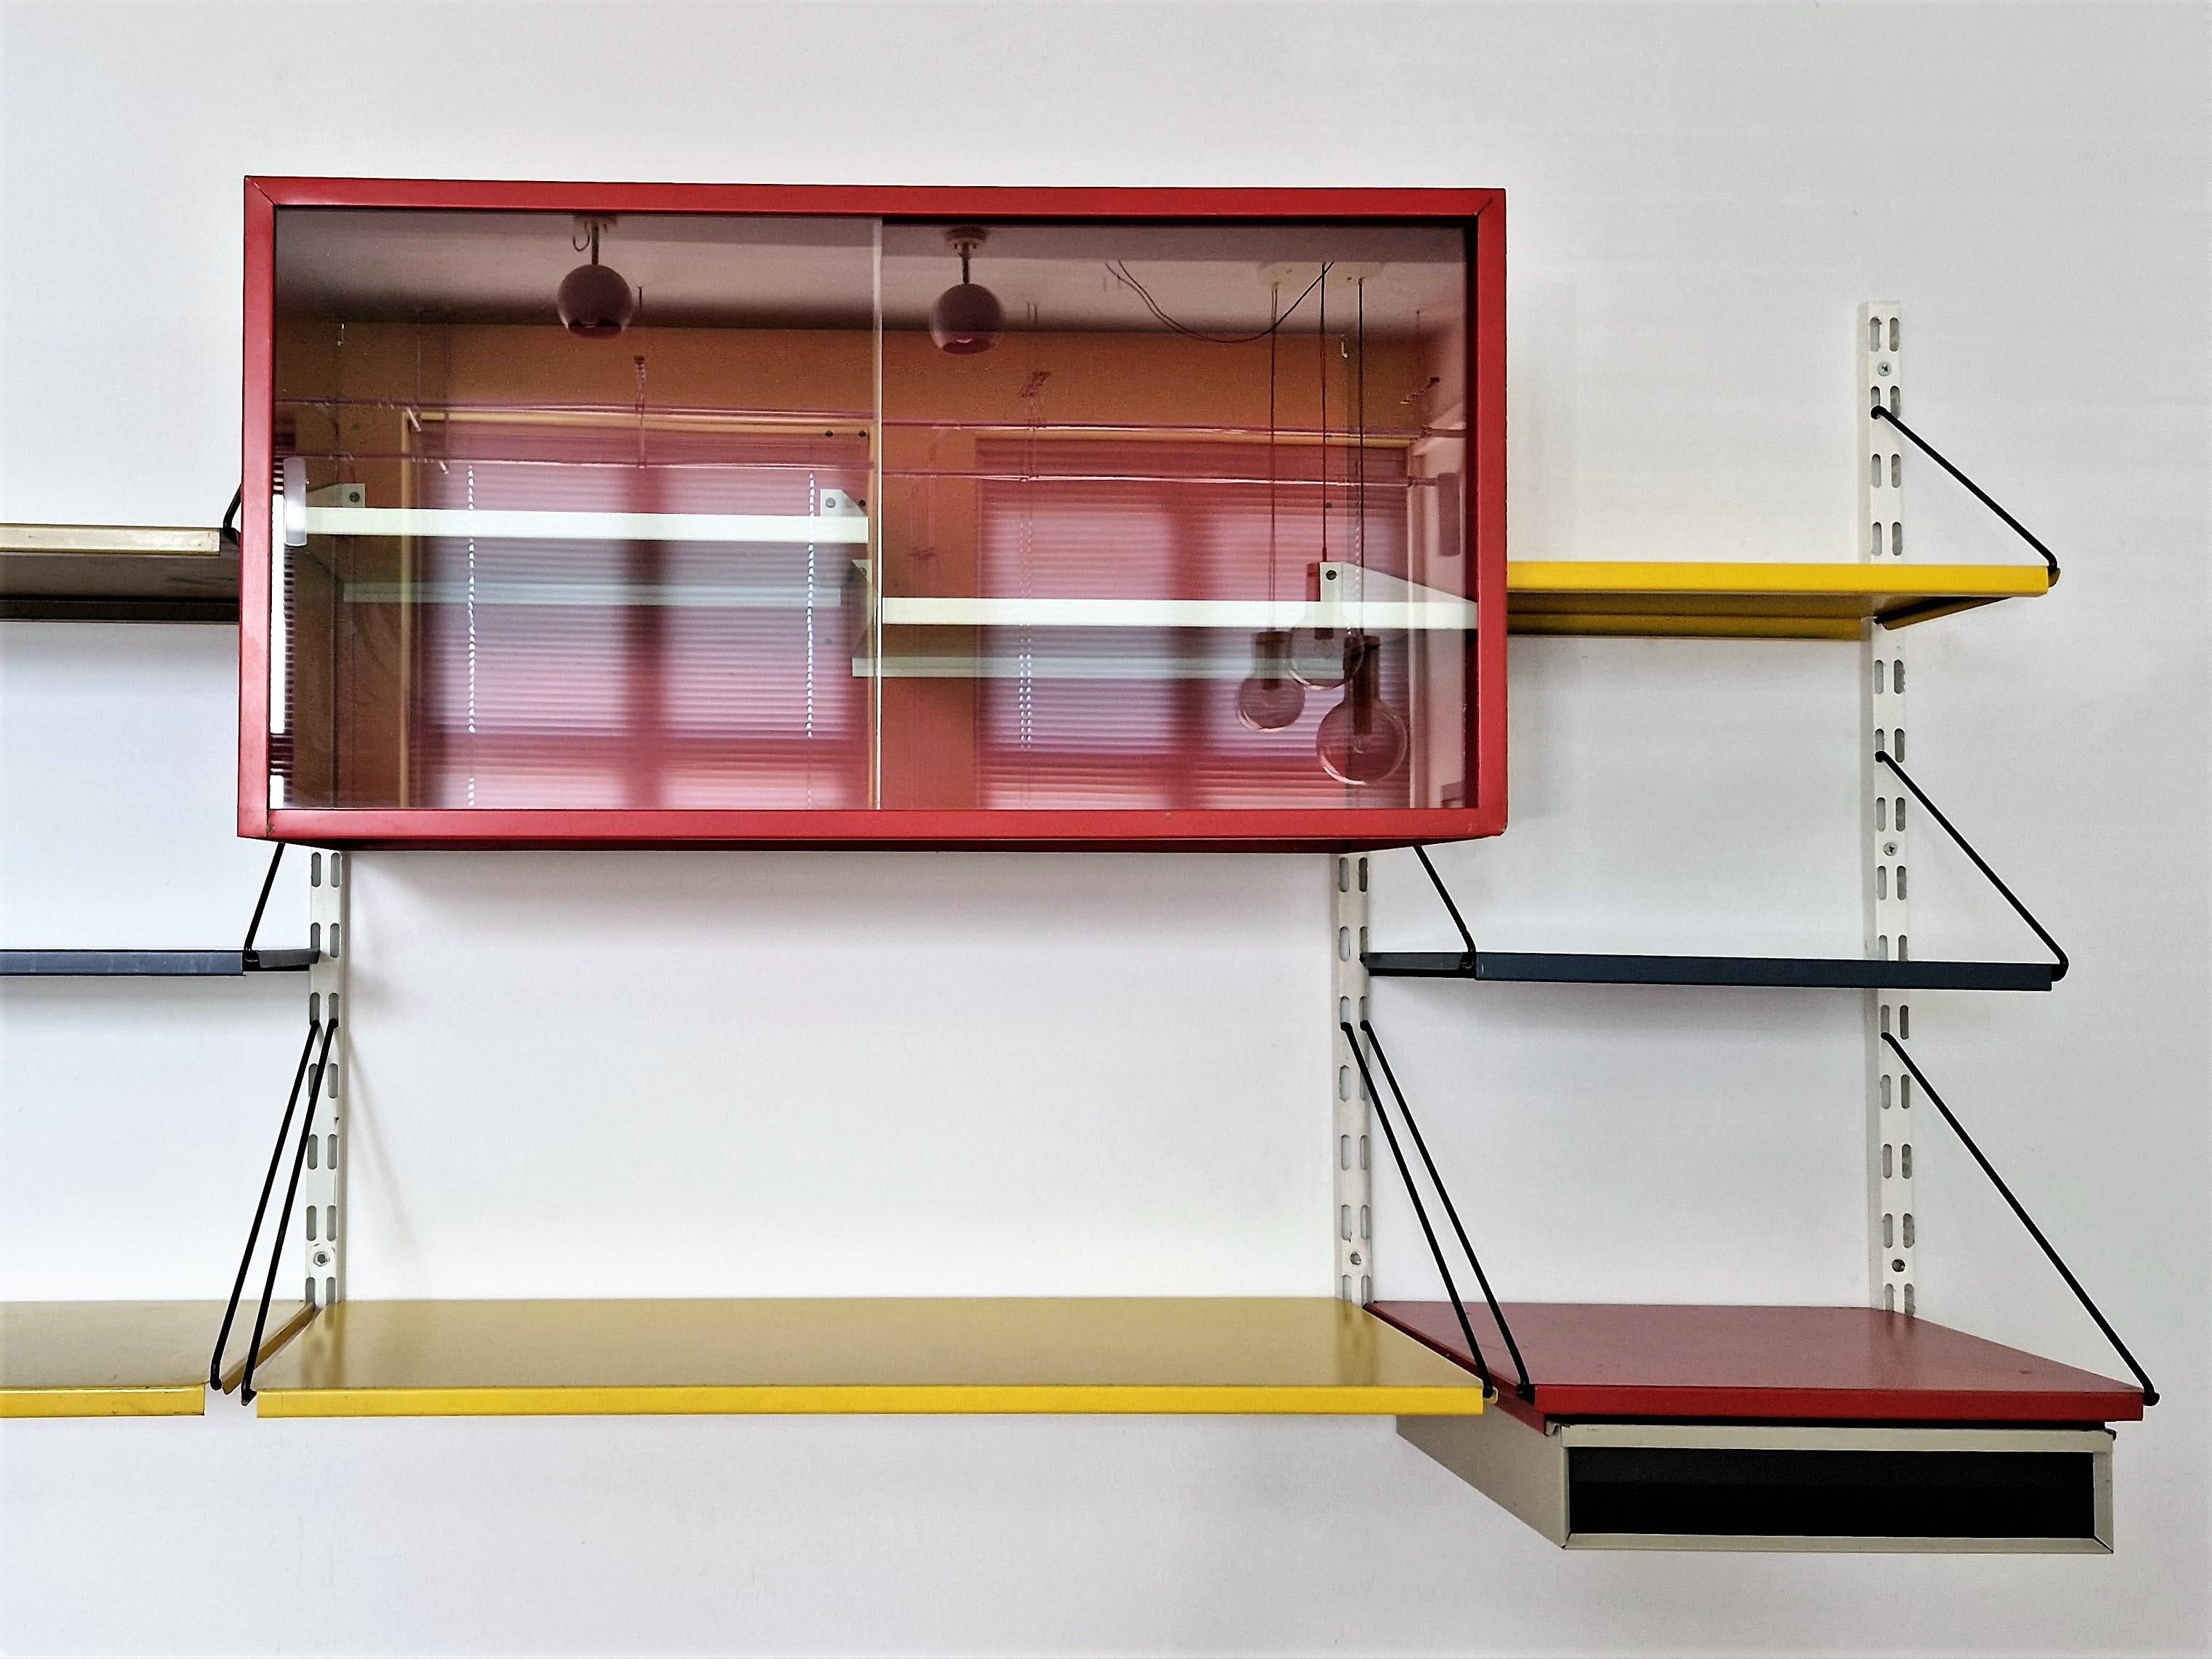 Metal Wall Unit in Red, Yellow and Blue by Tjerk Rijenga for Pilastro, 1950's In Good Condition For Sale In Steenwijk, NL